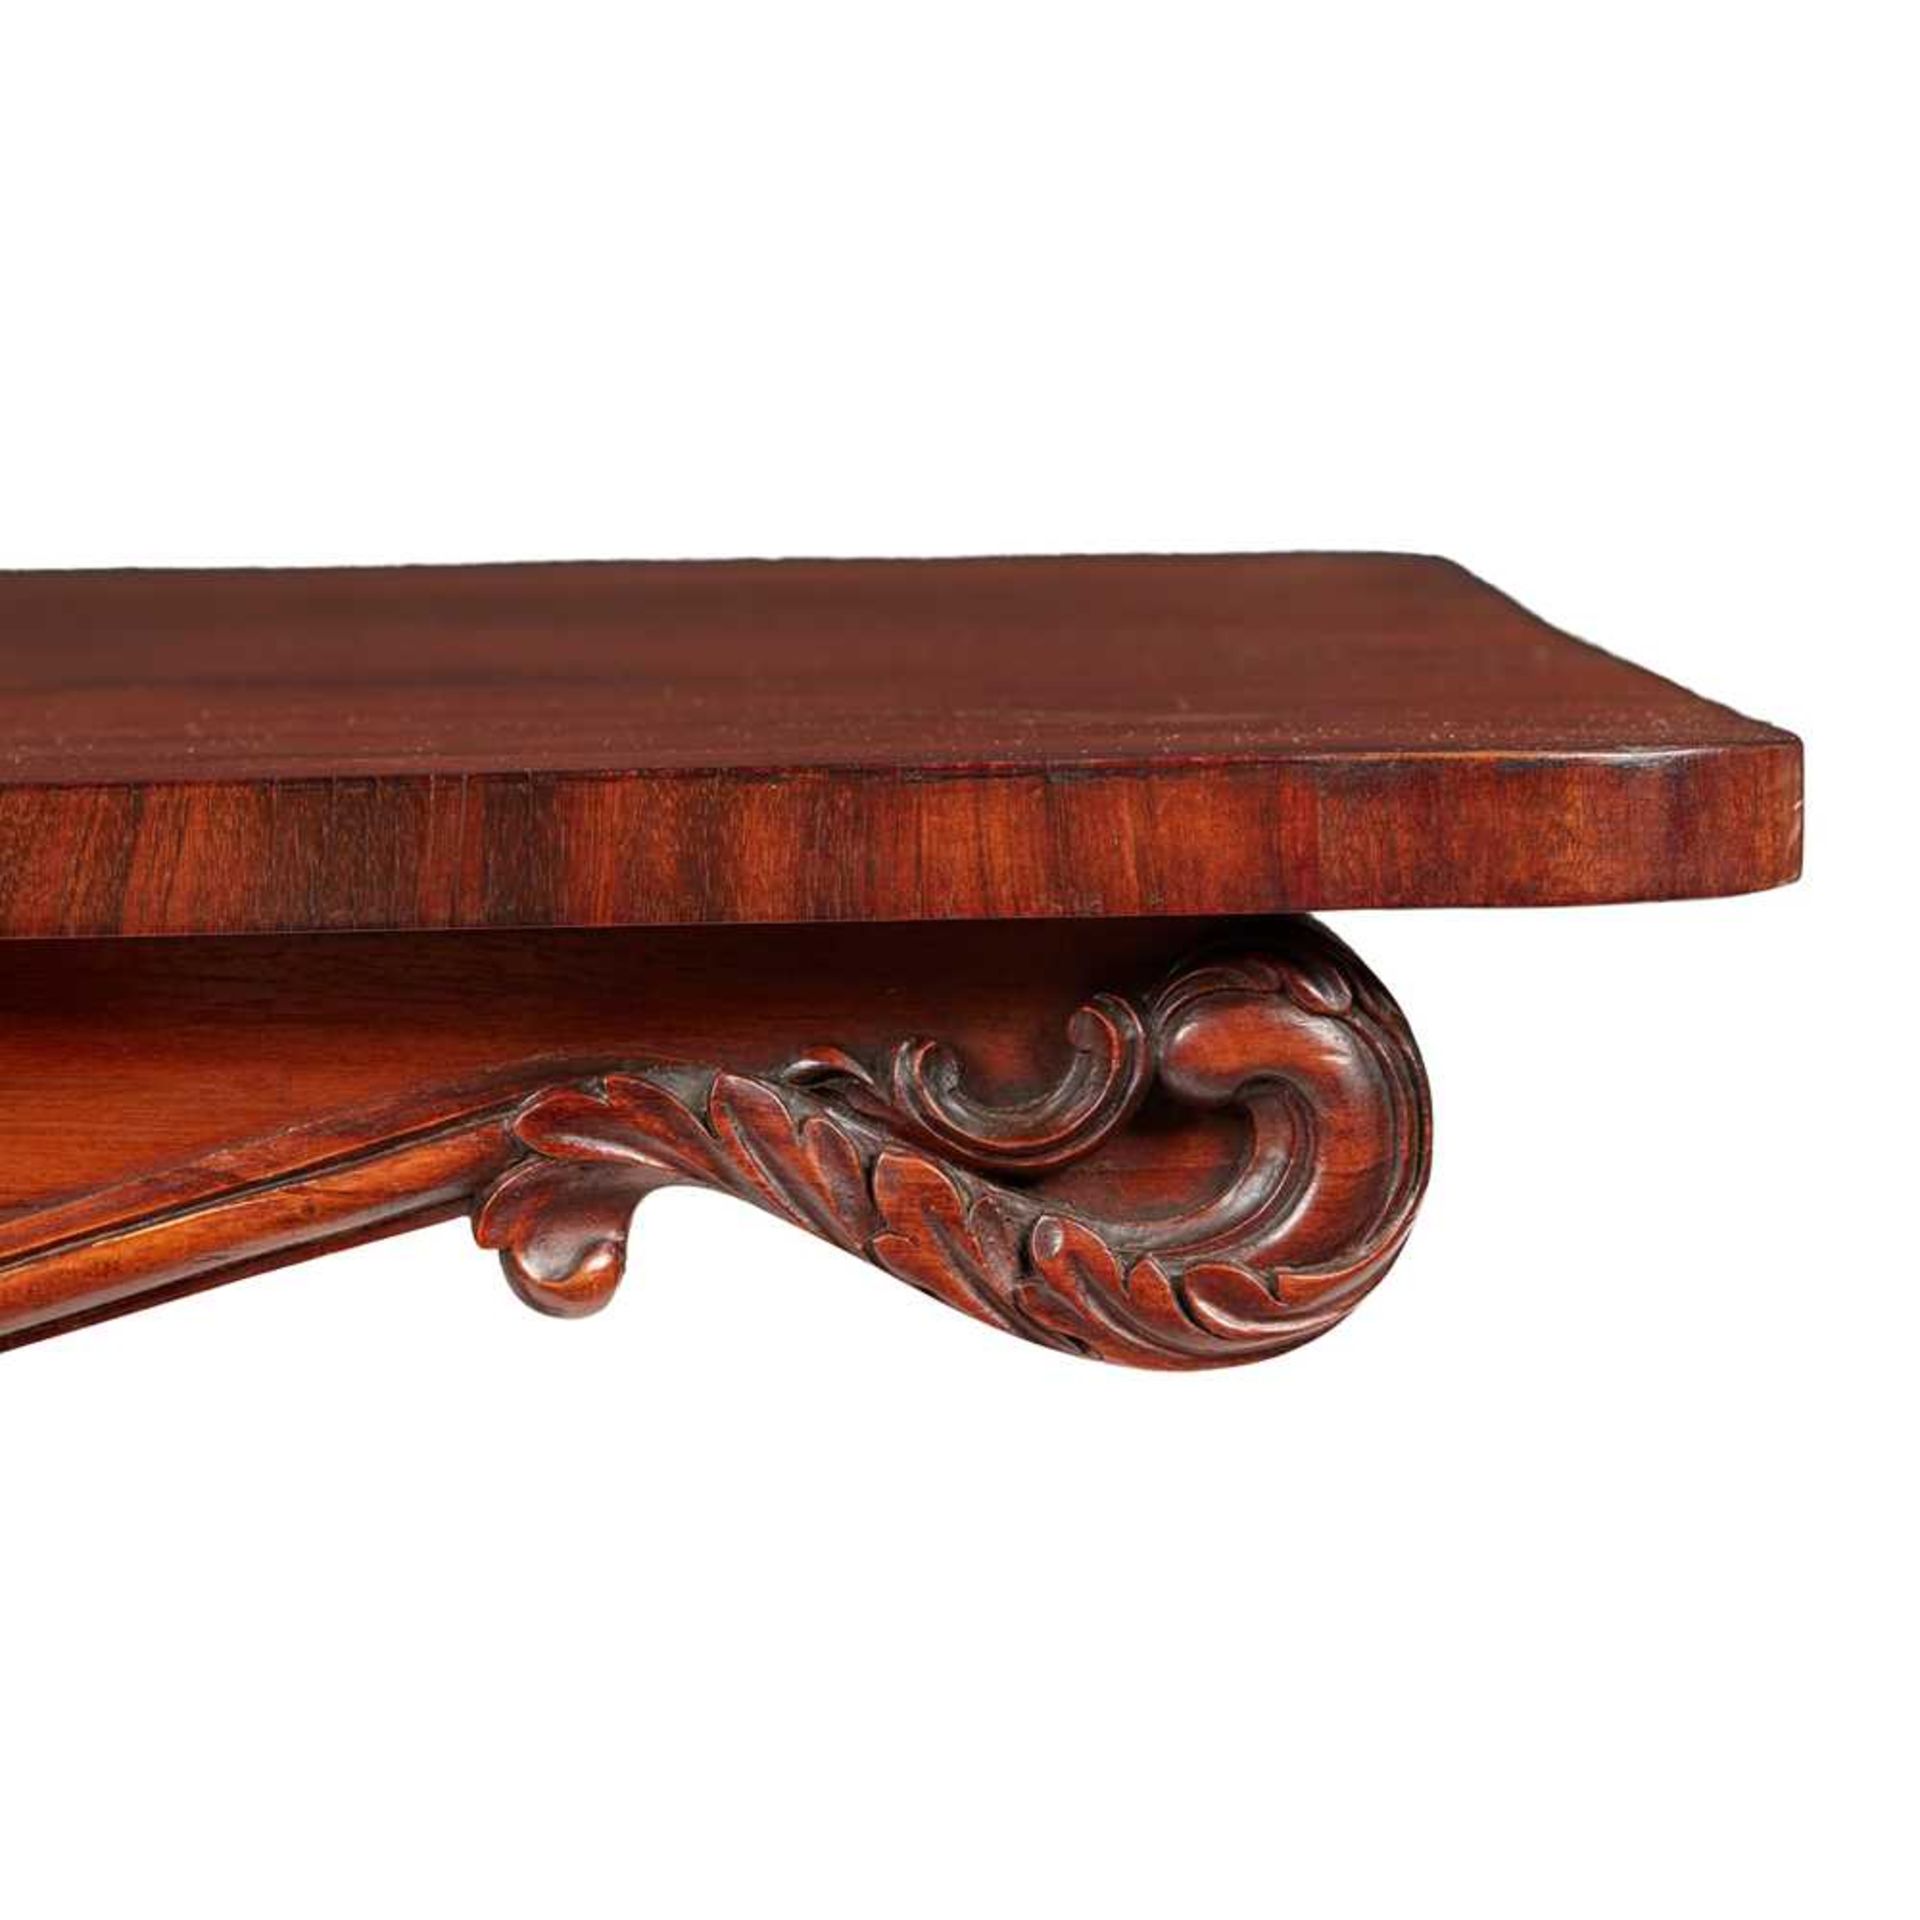 A FINE REGENCY GONCALO ALVES CENTRE TABLE, ATTRIBUTED TO JAMES MEIN OF KELSO EARLY 19TH CENTURY - Image 2 of 5